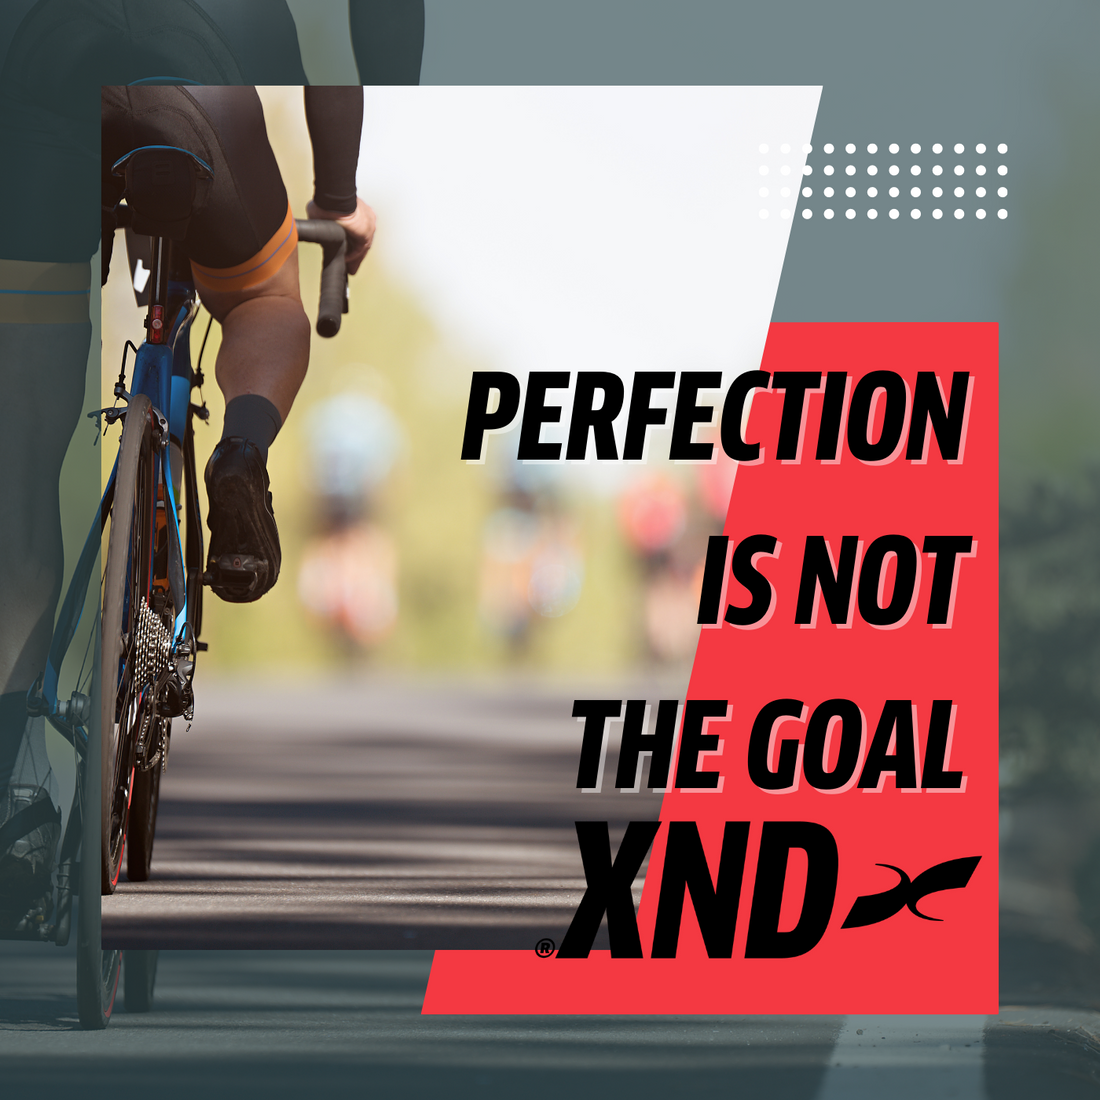 Perfection is not the goal